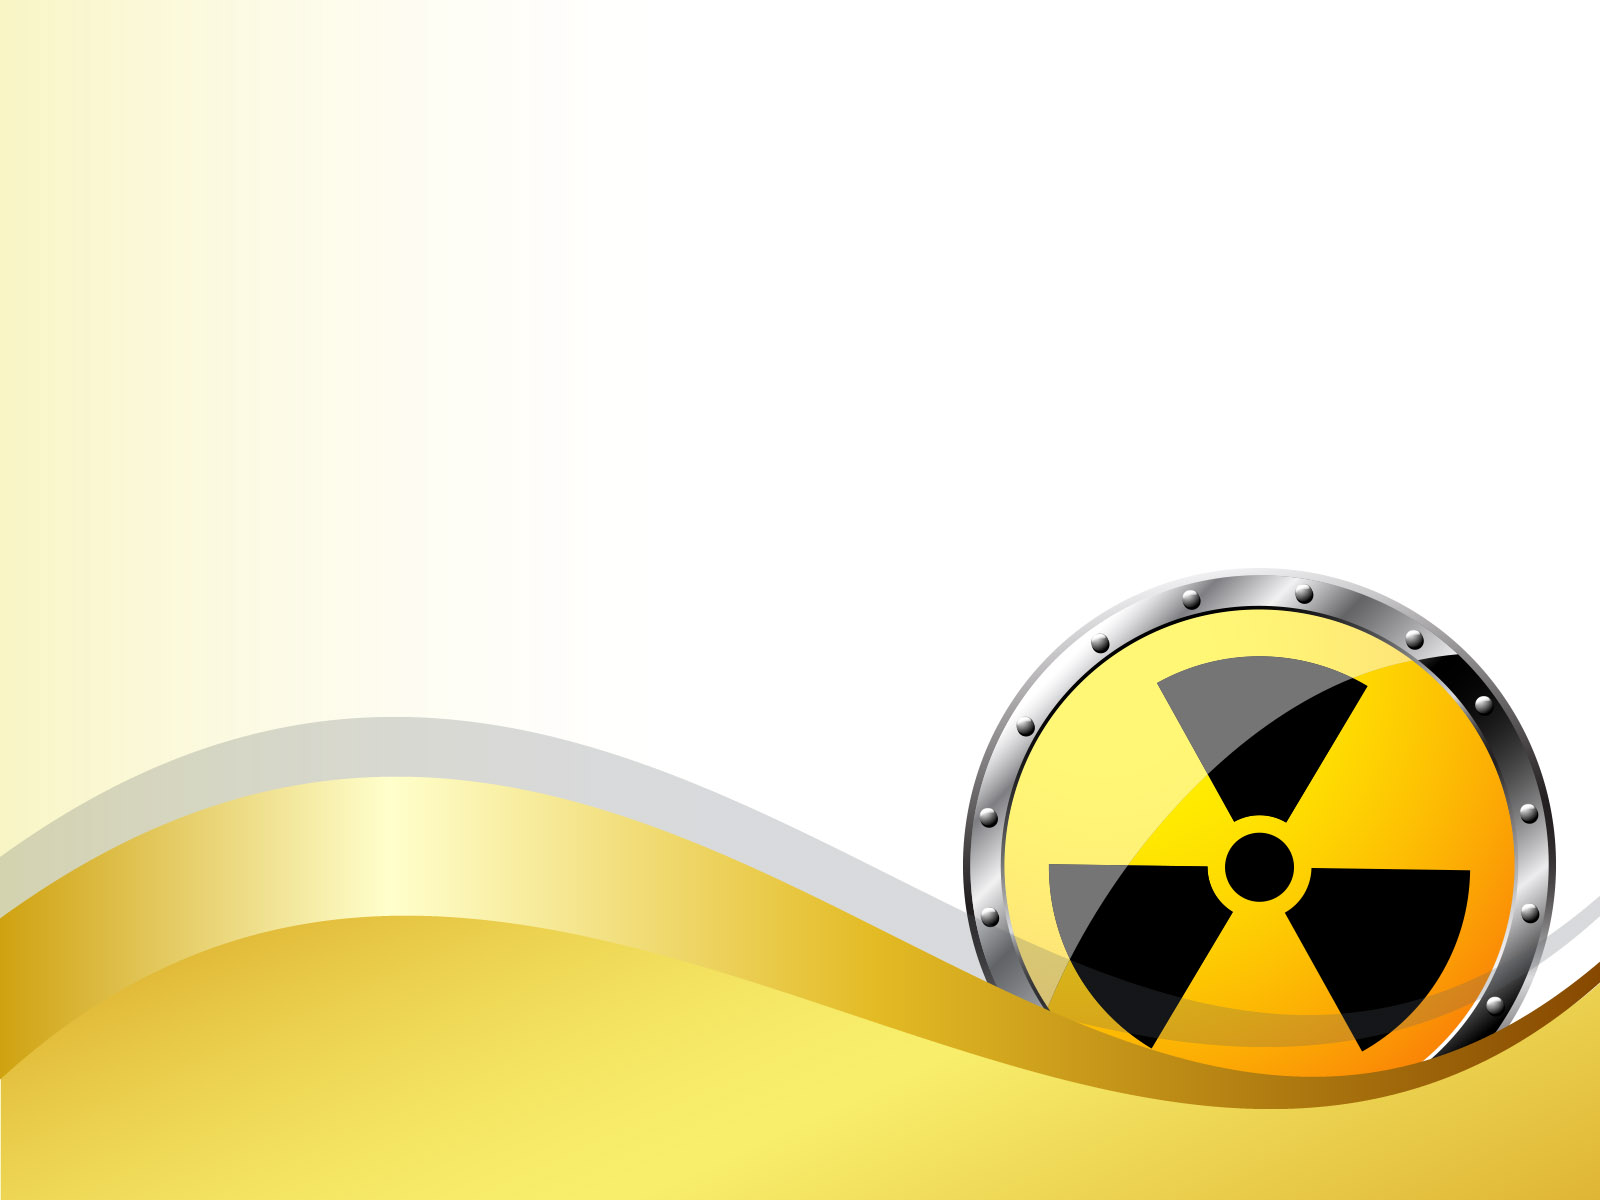 Radiation radioactivity Powerpoint Templates - Business & Finance In Nuclear Powerpoint Template